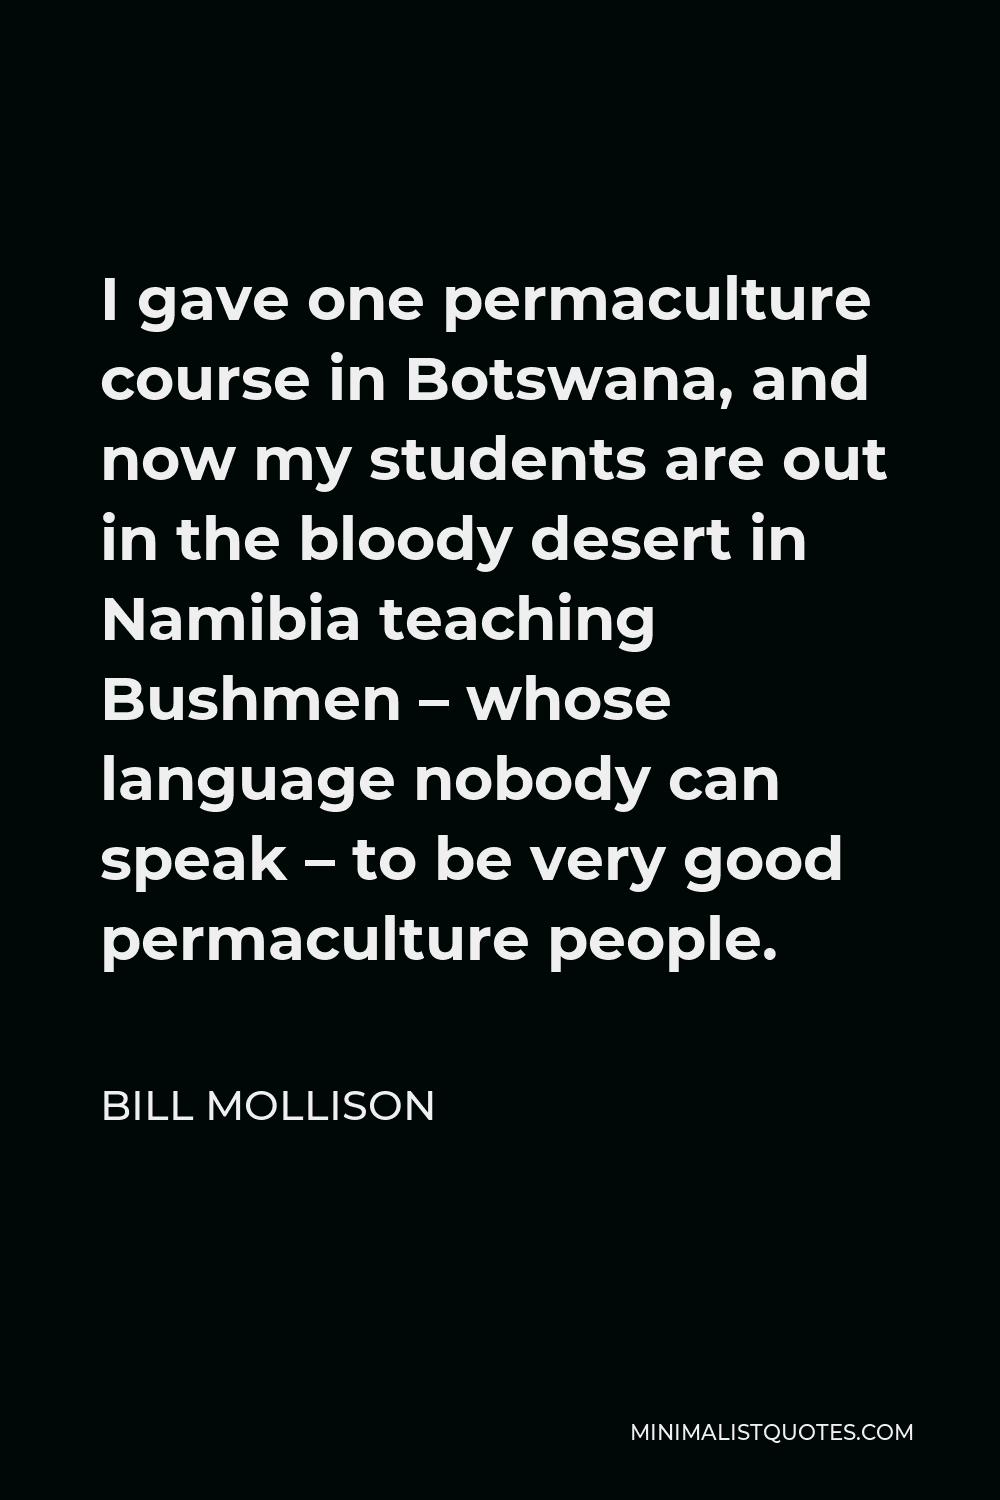 Bill Mollison Quote - I gave one permaculture course in Botswana, and now my students are out in the bloody desert in Namibia teaching Bushmen – whose language nobody can speak – to be very good permaculture people.